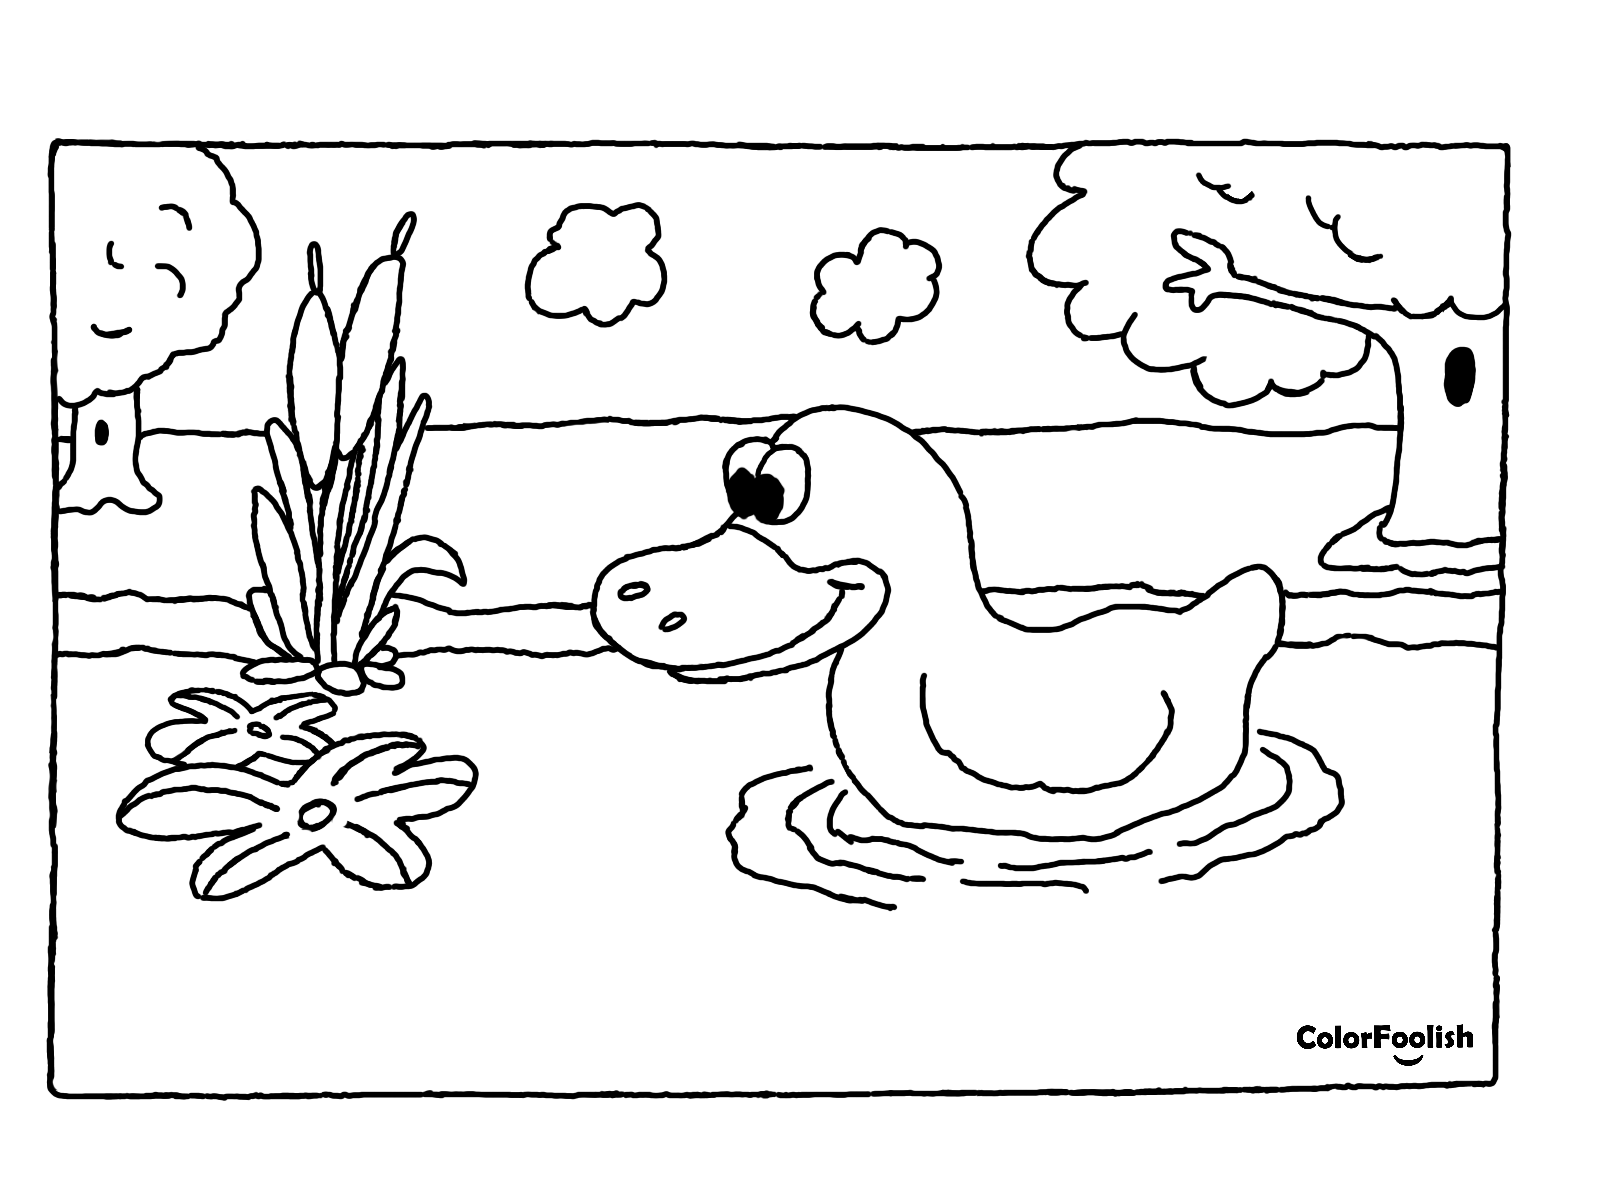 Download Coloring page of a duck in a pond - ColorFoolish